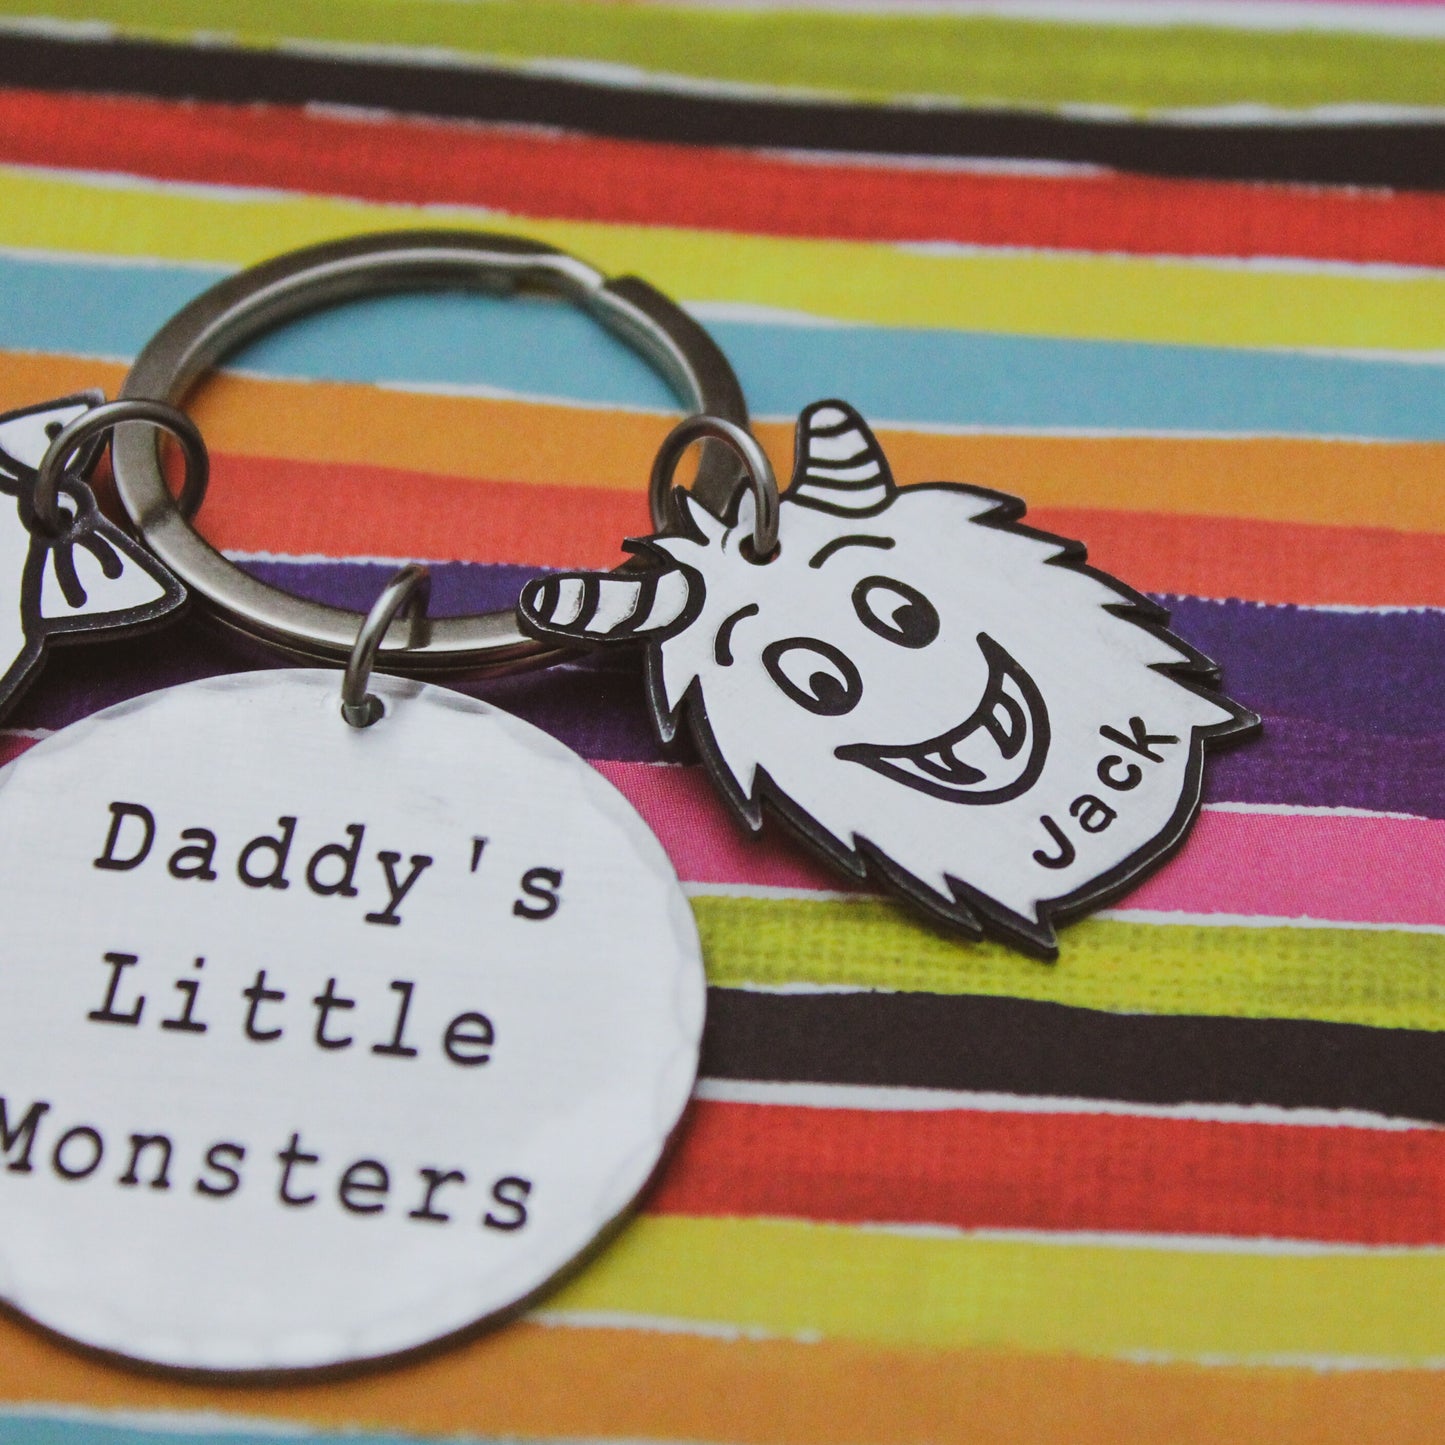 Daddy's Little Monsters Keychain, Monster Keychain, Father's Day Gift, Gift for Him, Dad's Monsters Keychain, Grandfather Gift, Monster Gift